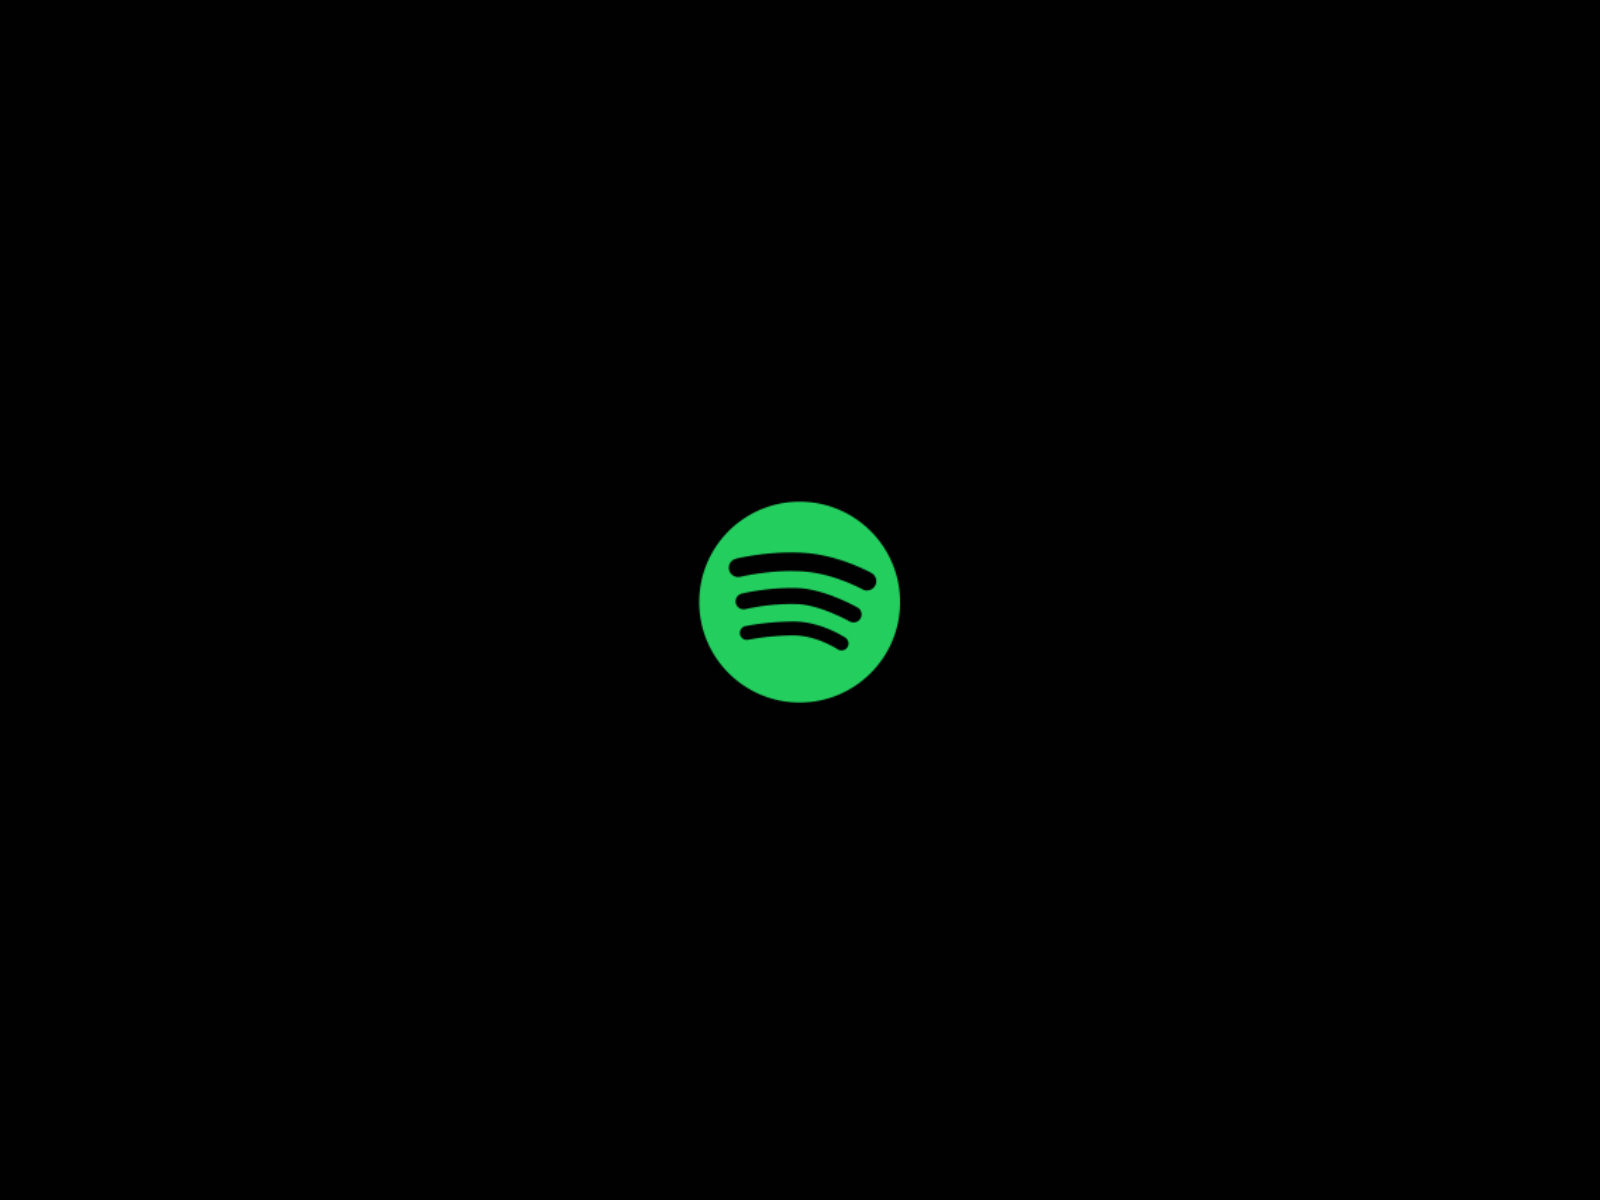 Spotify Logo Animation by Mehdi on Dribbble